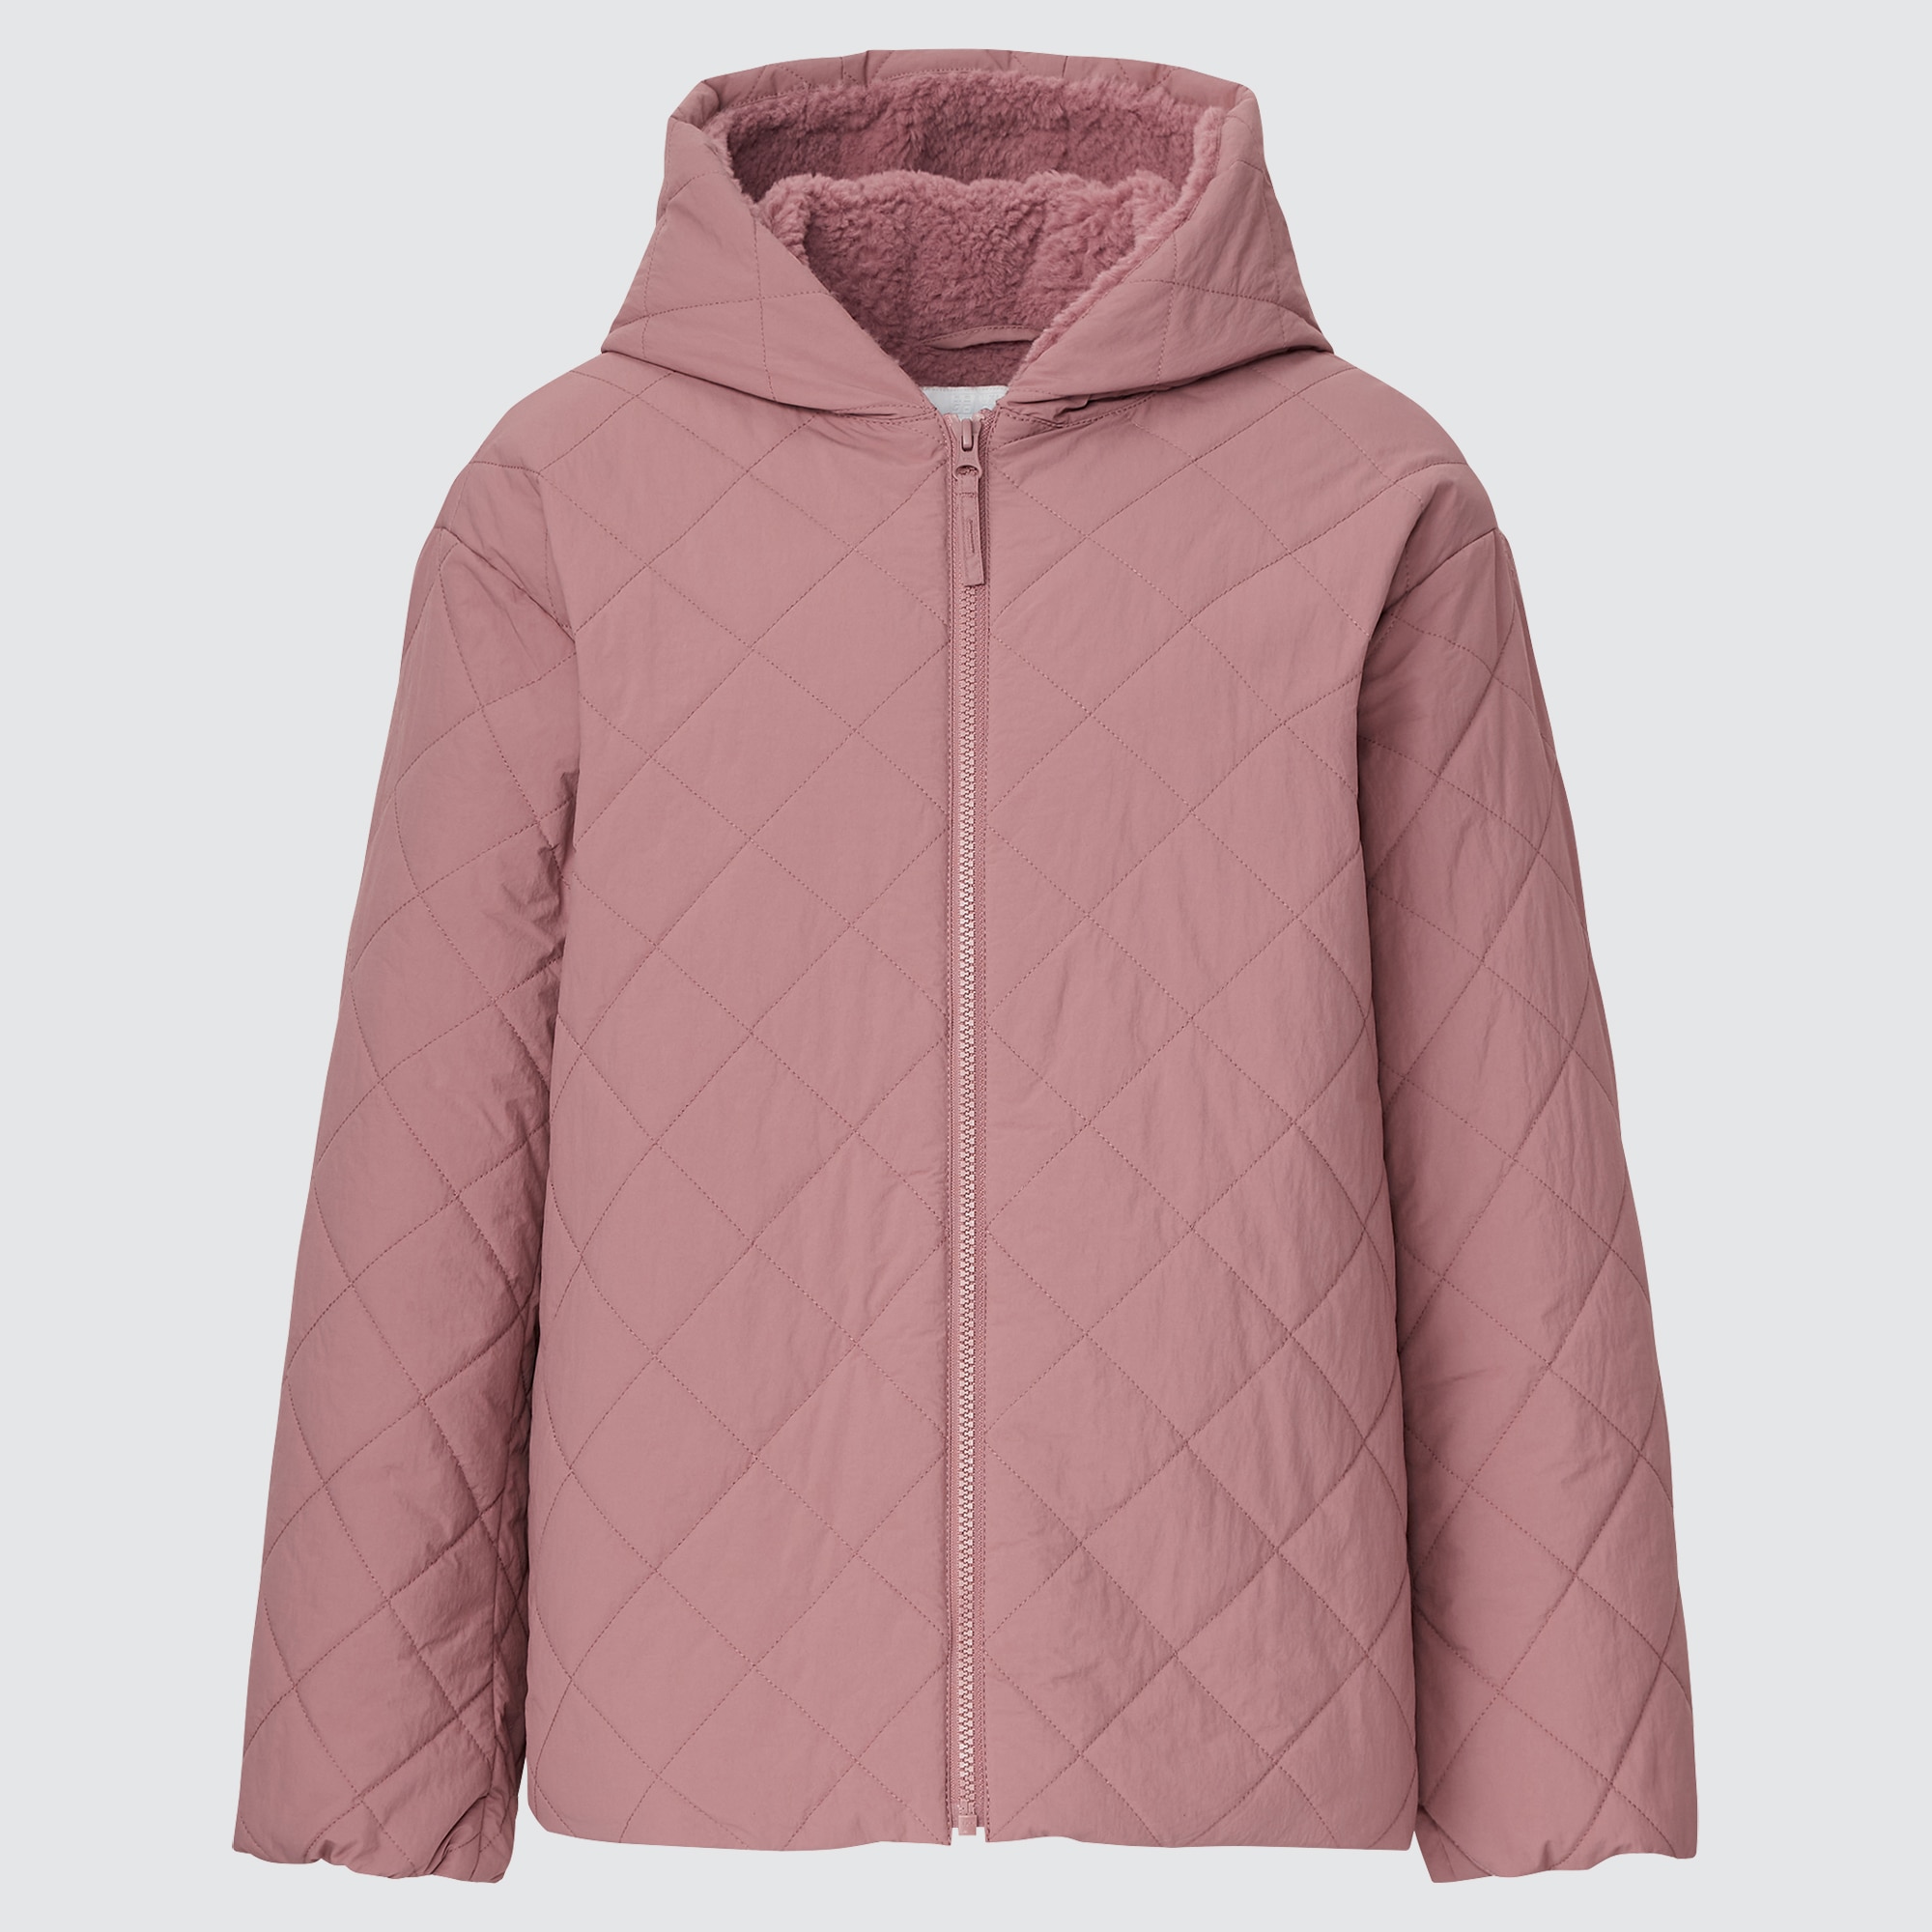 Uniqlo Women Ultra Light Down Vest and Jackets on Sale 2018  The  Strategist